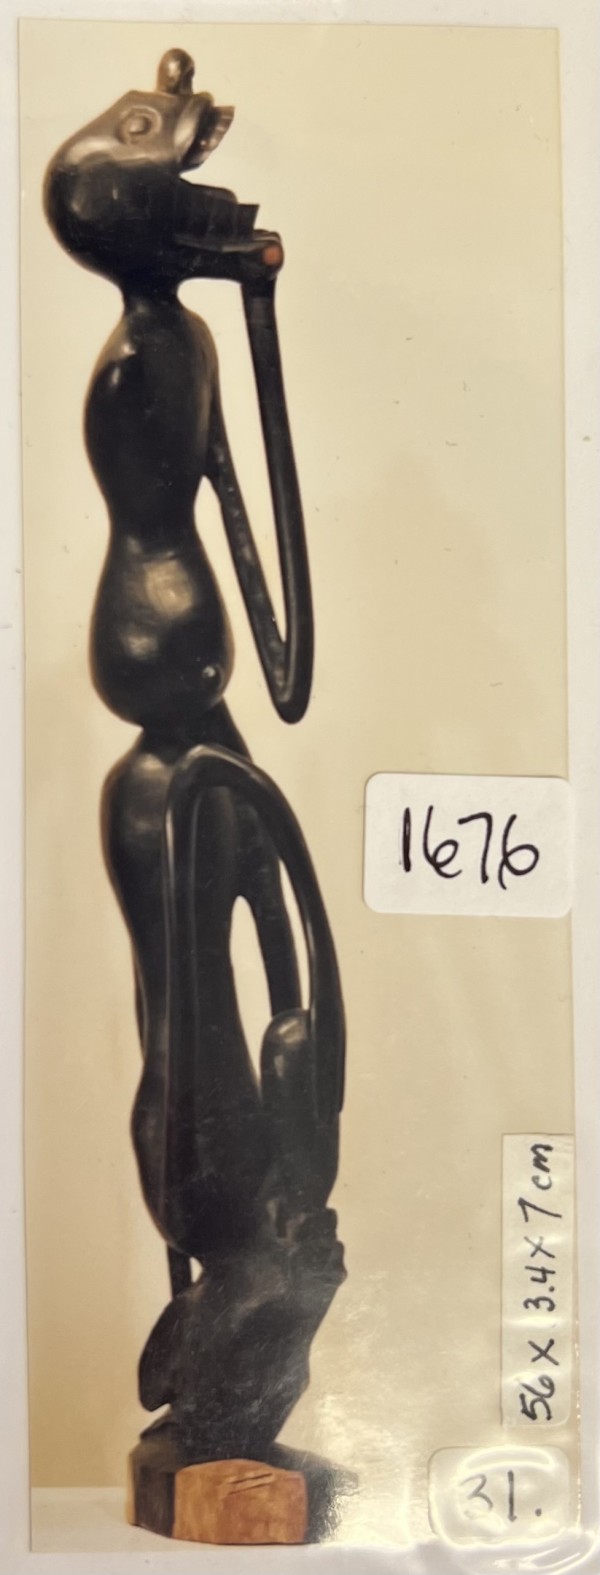 1676 - African Wooden Carving #31